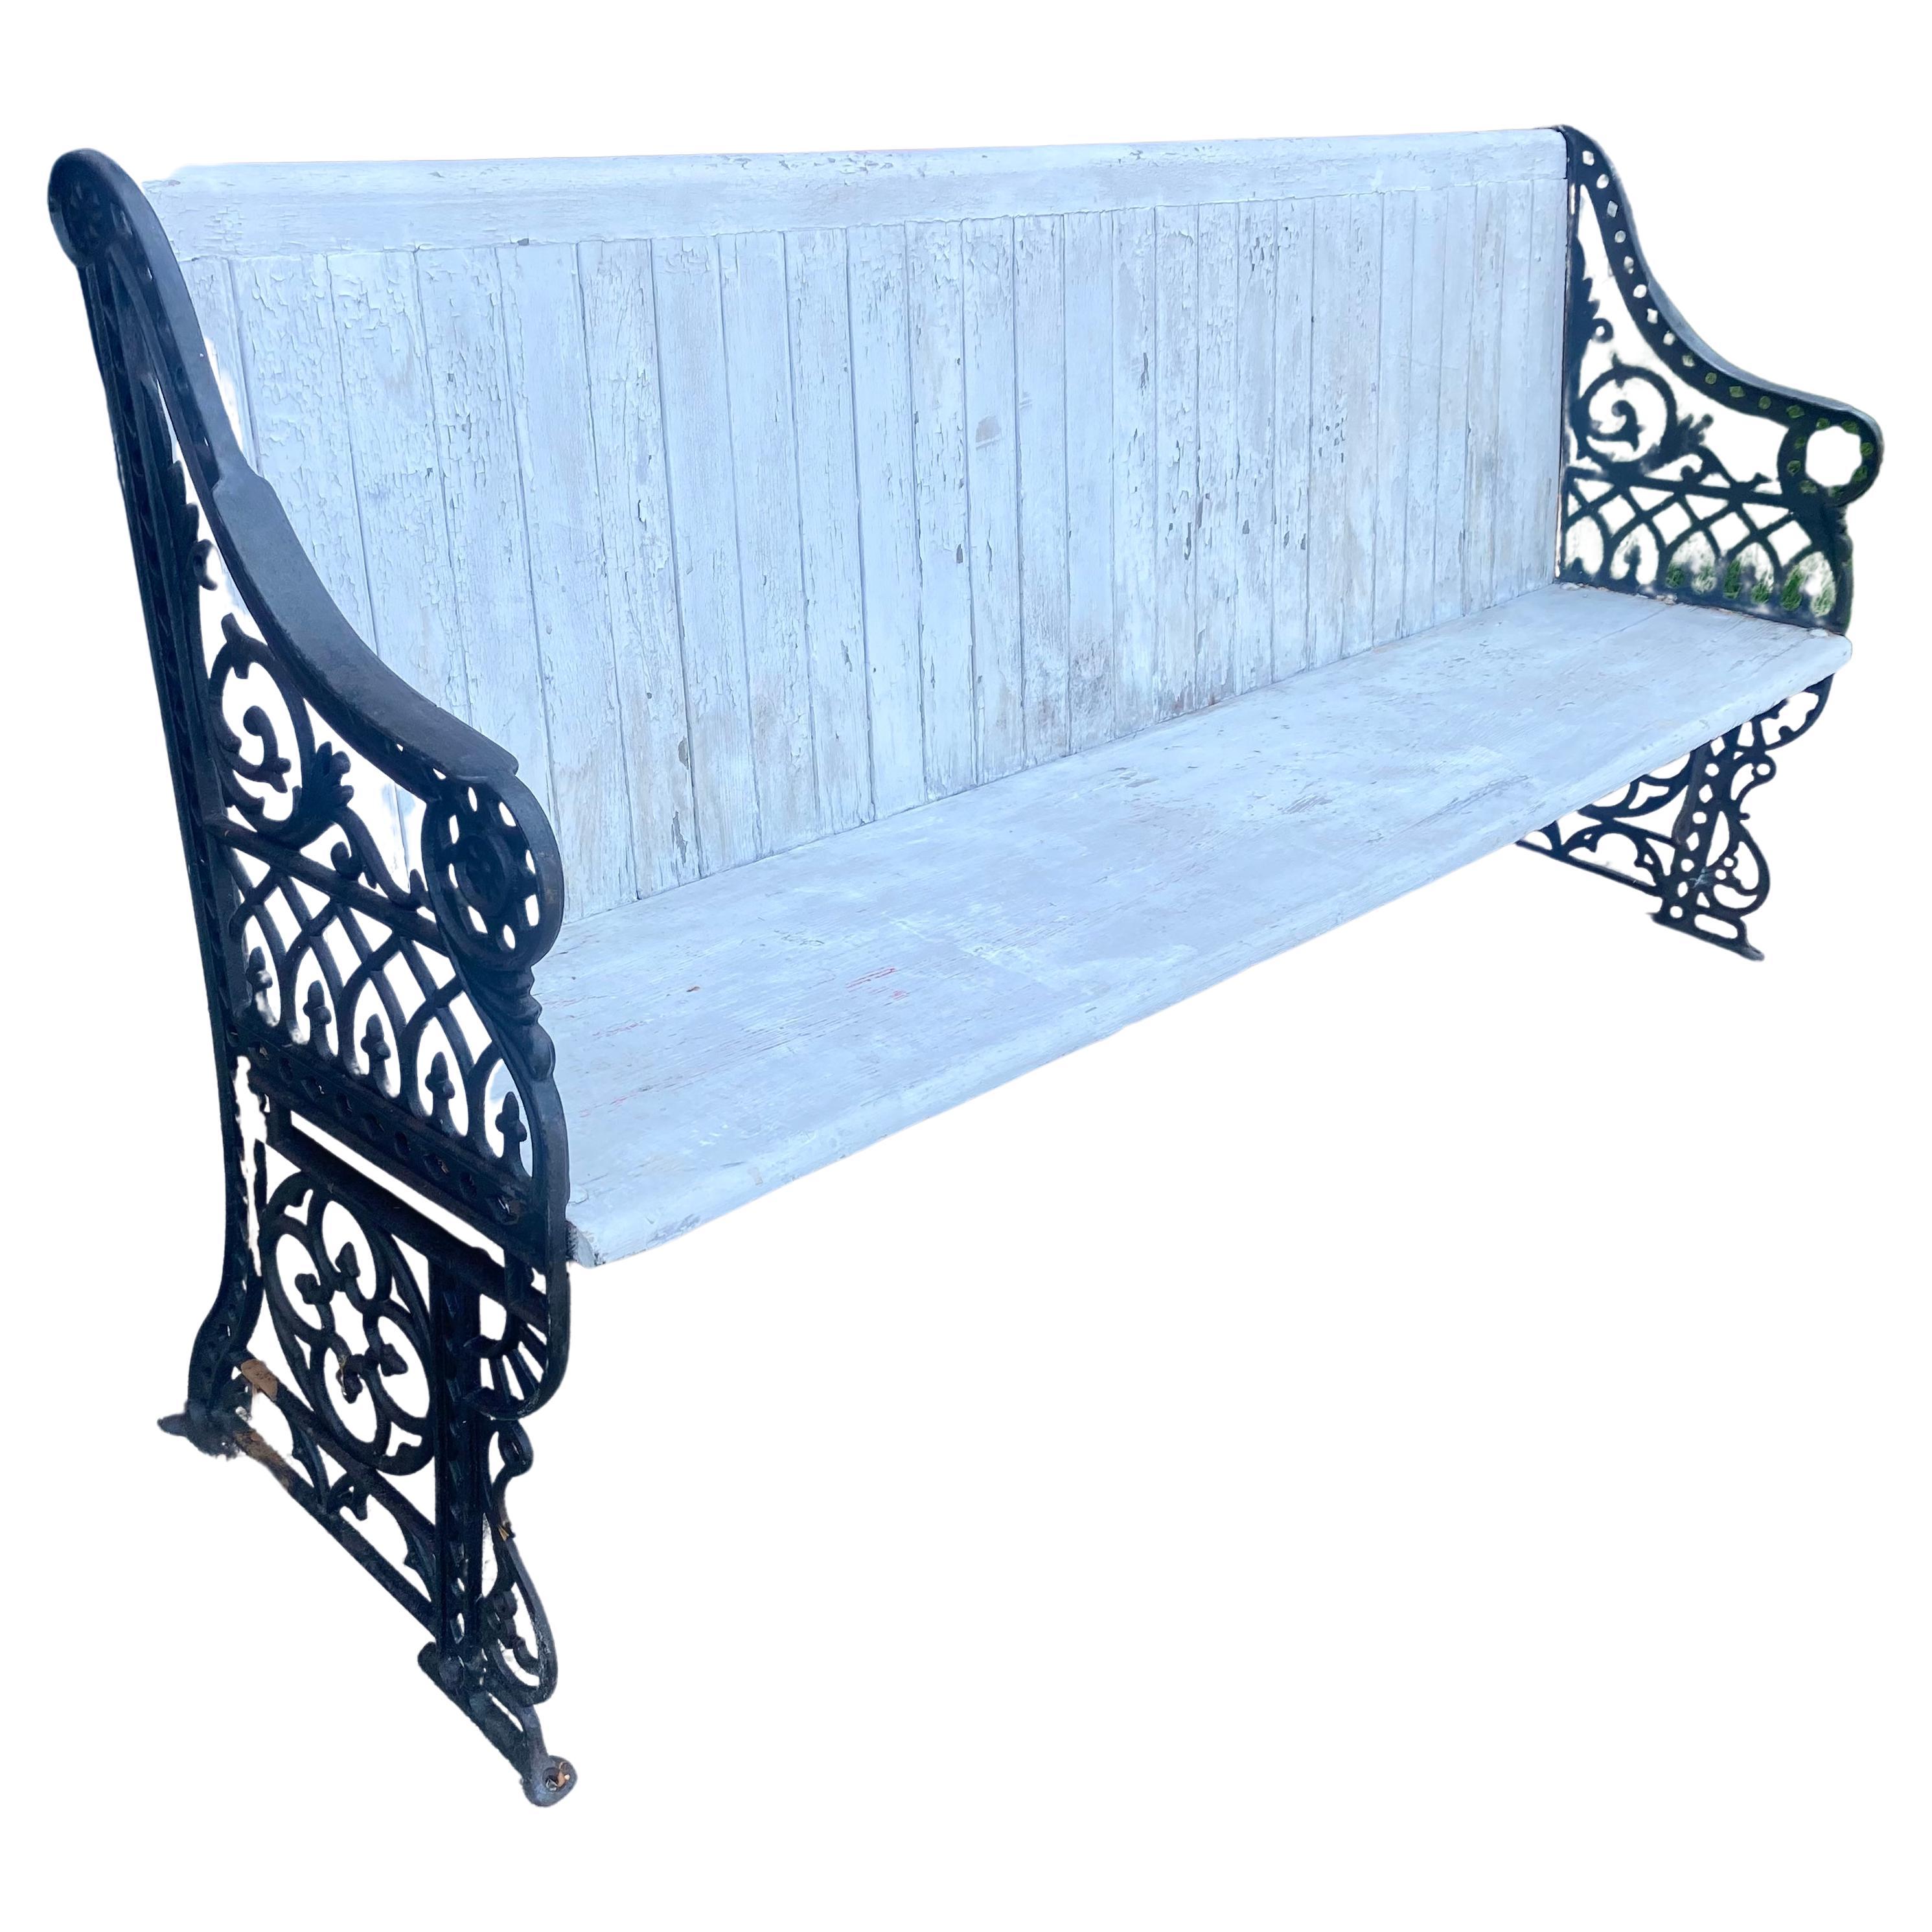 Unusual Train / Bus Terminal Cast Iron and Wood bench ....Garden bench For Sale